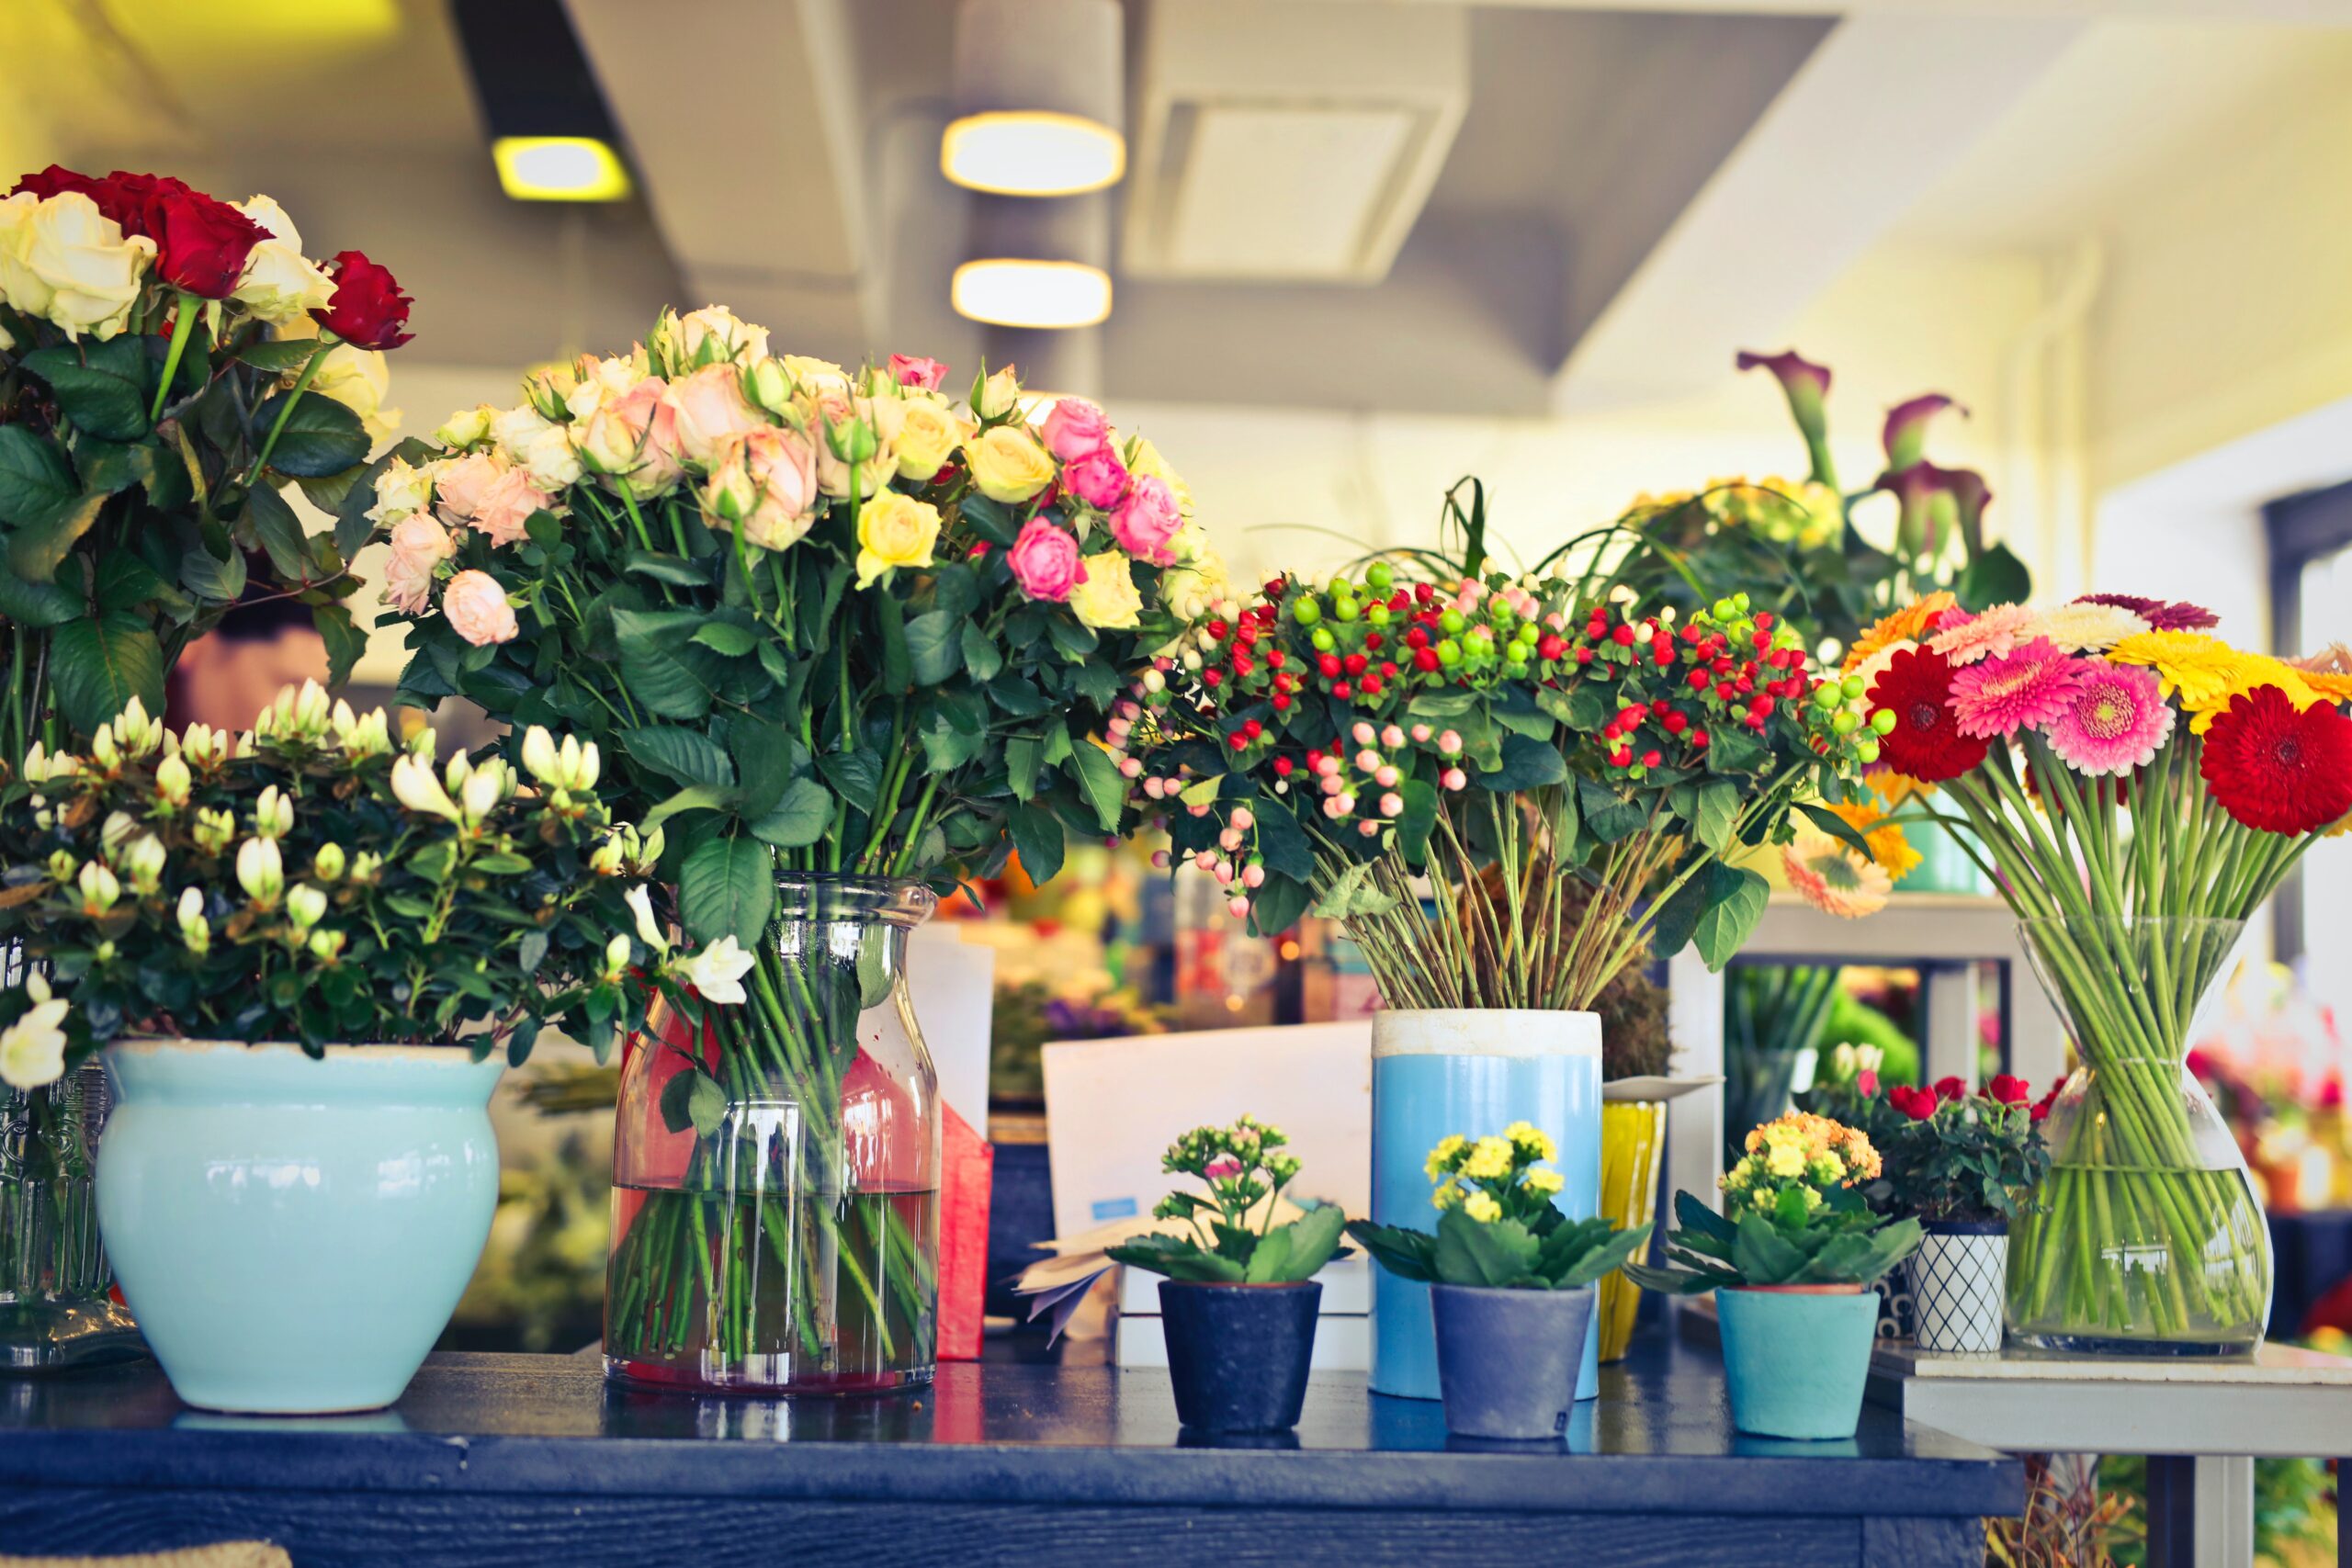 Flower Shop For Sale in Charlotte NC: Thriving retail florist with a team o...